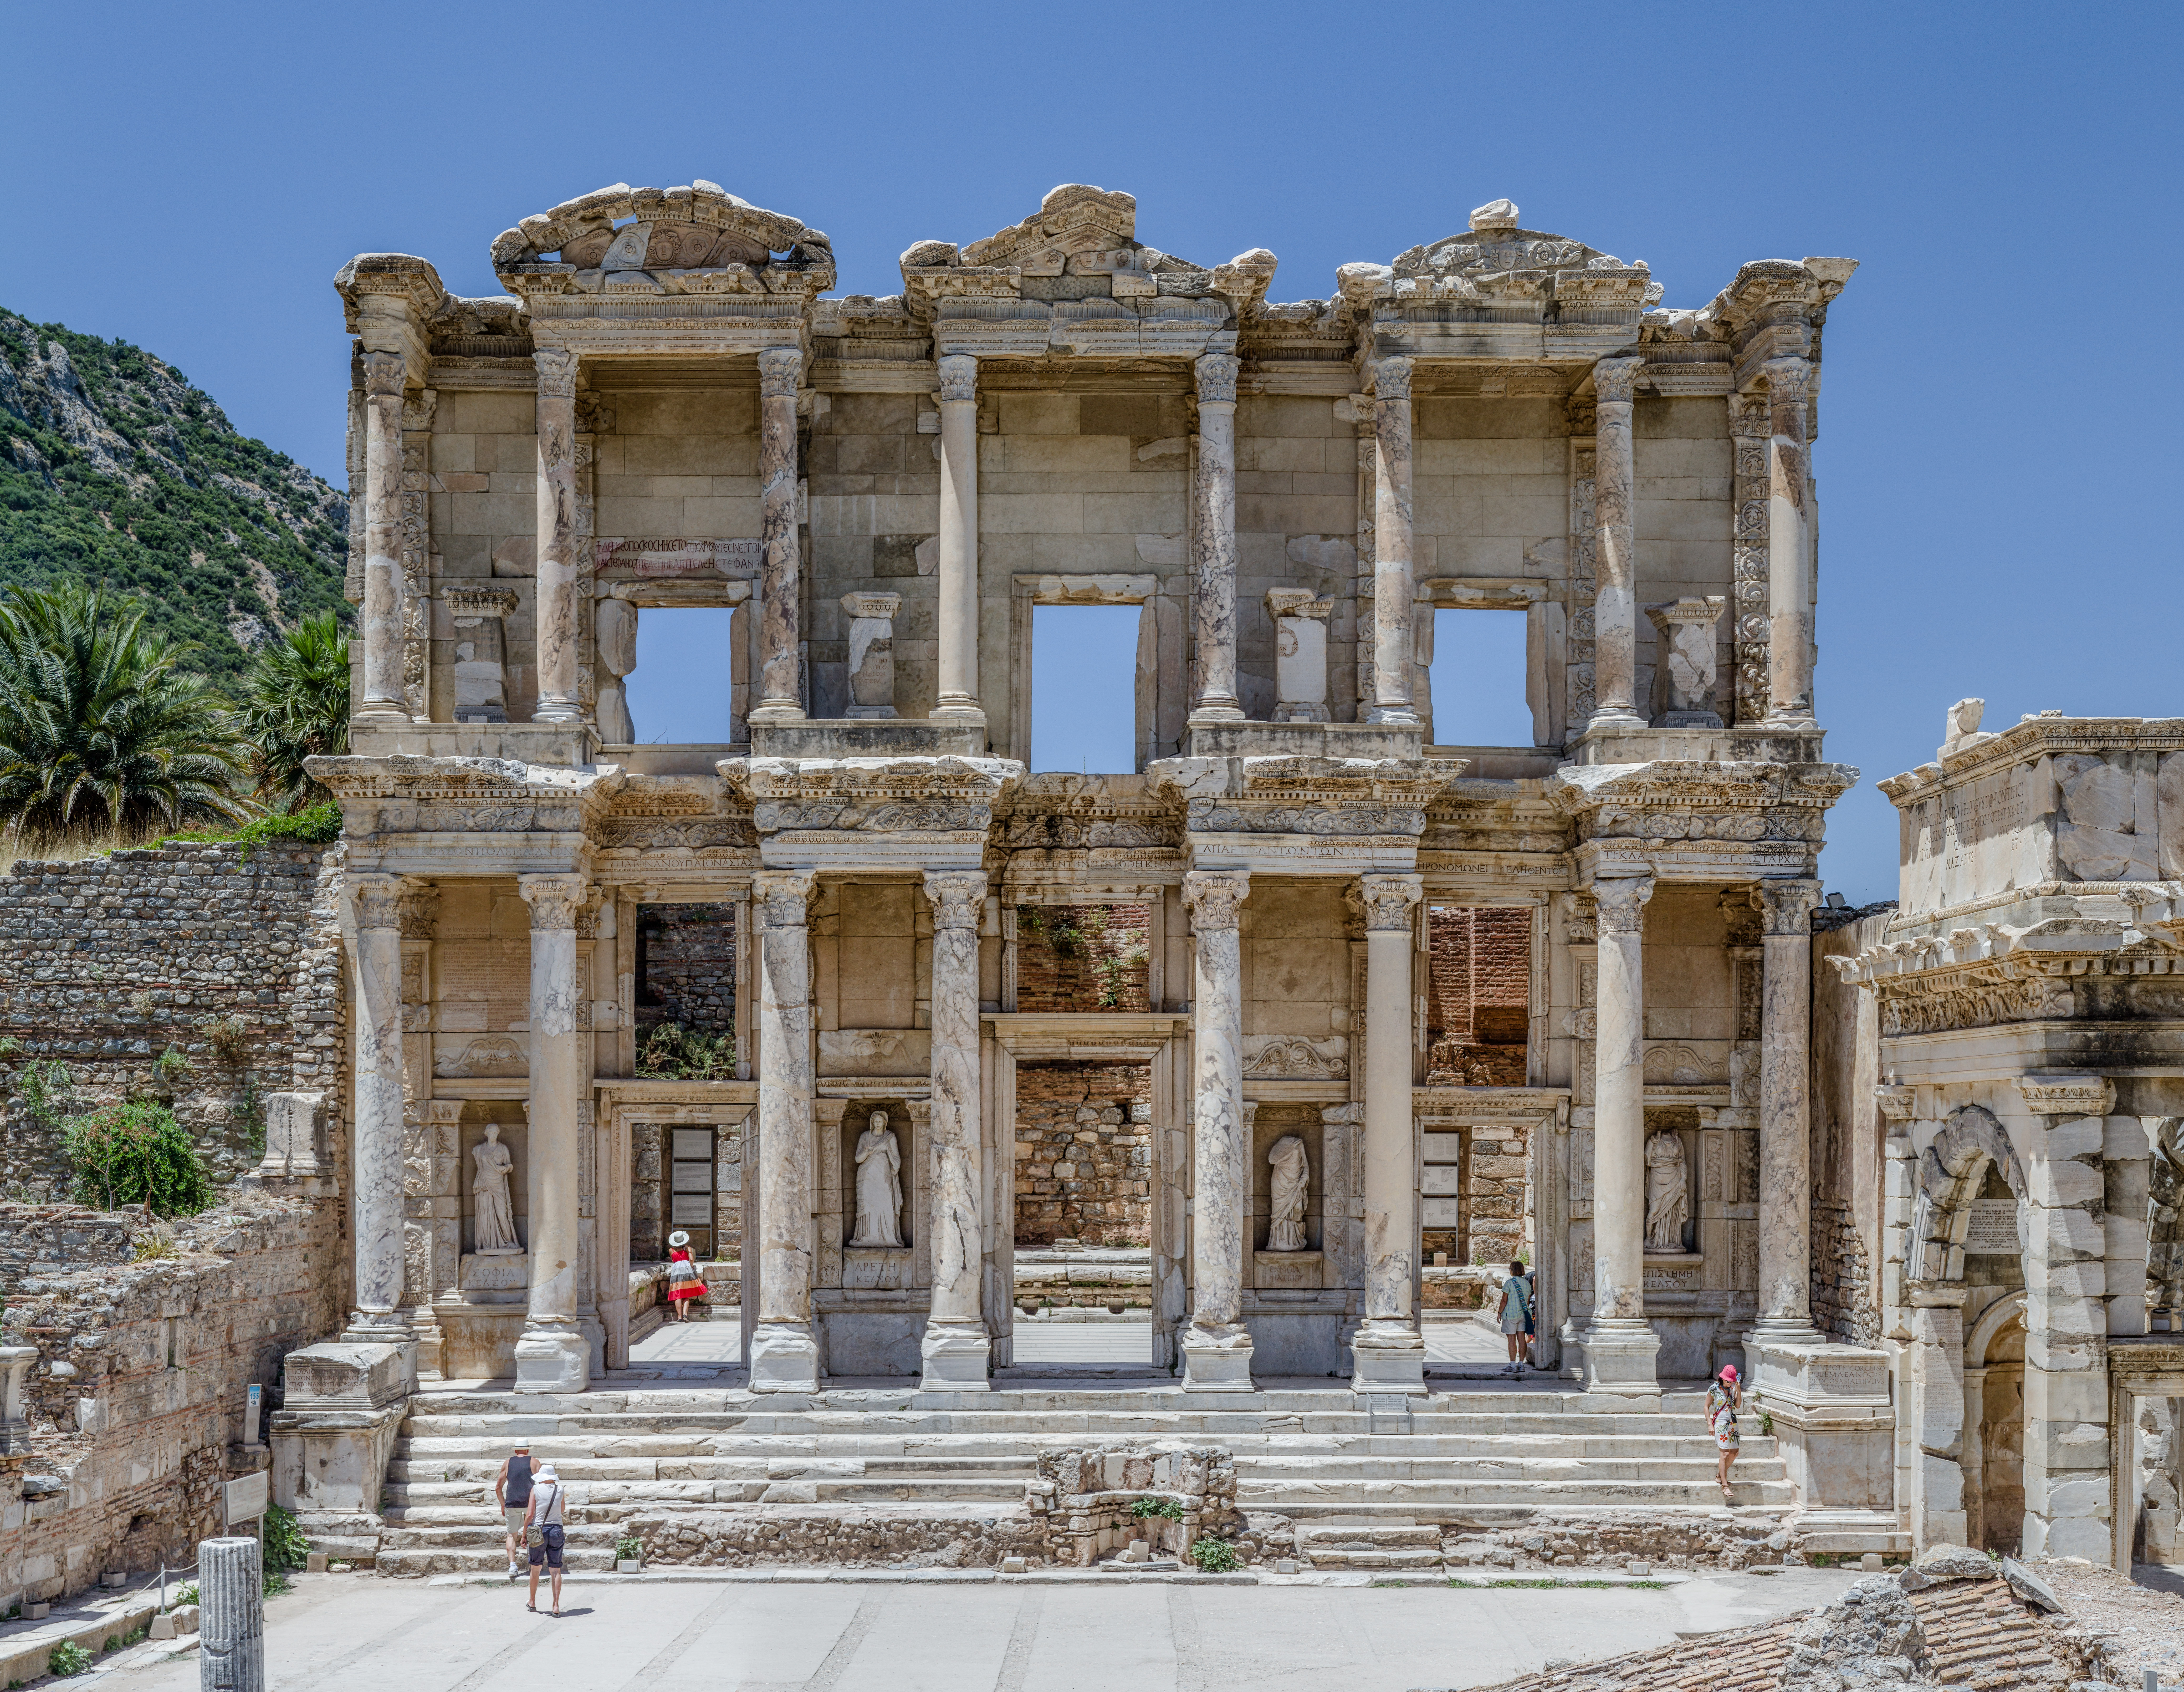 Façade of the Celsus library, in Ephesus, in what is today West Turkey. Image credits: Benh Lieu Song.